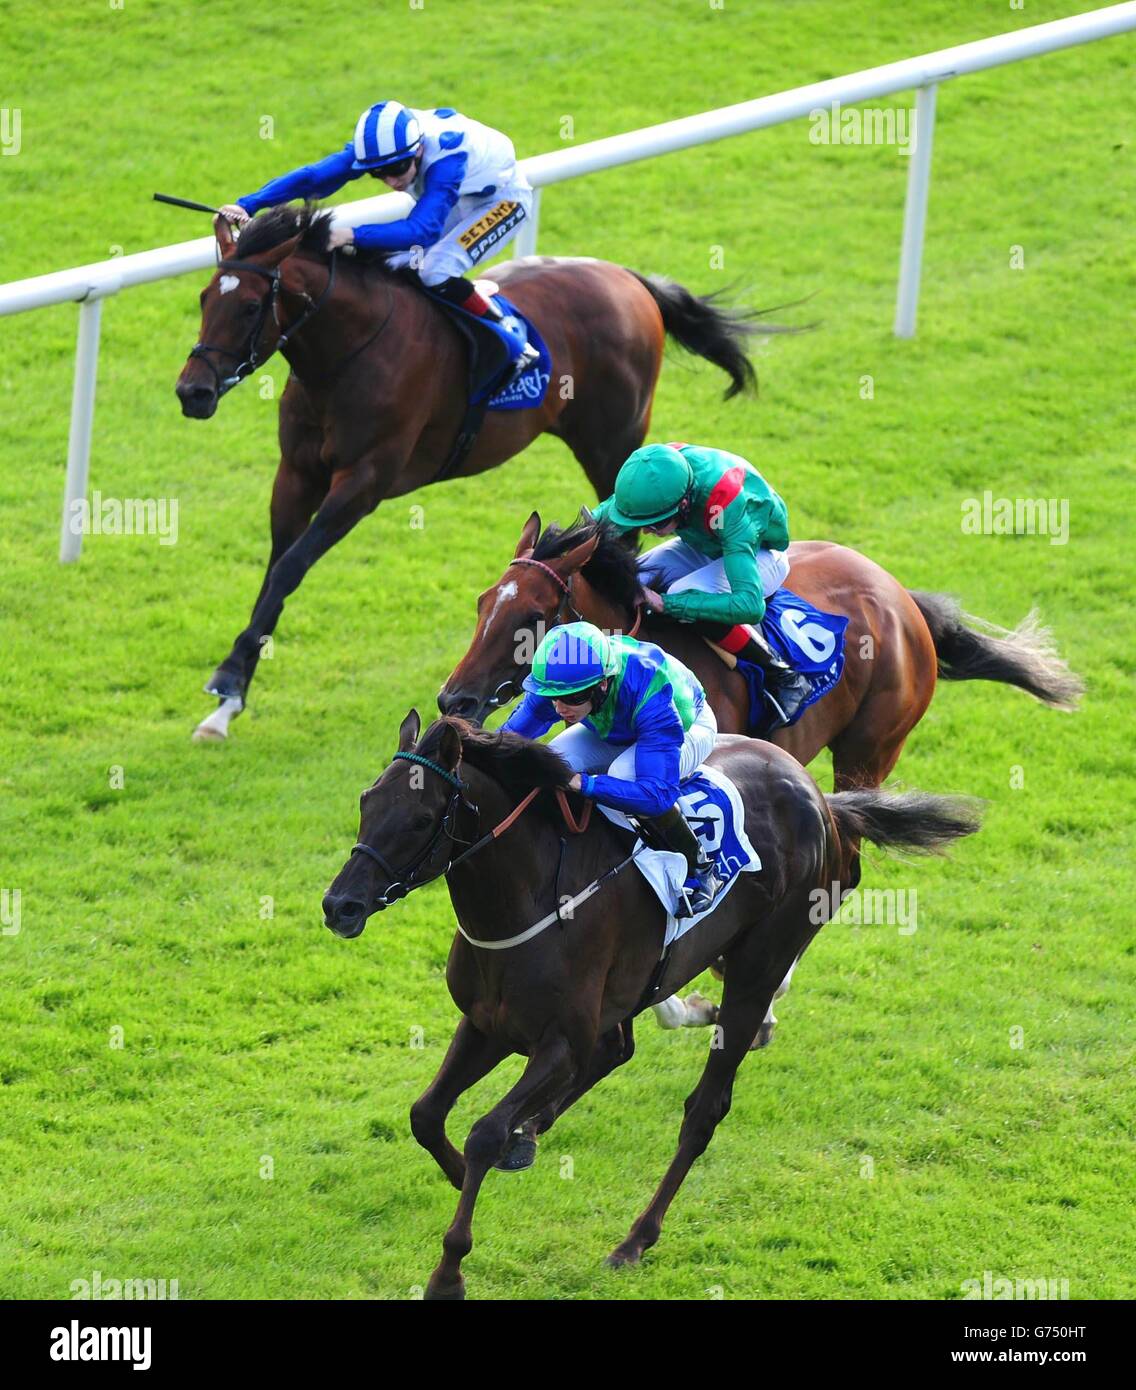 News at Six ridden by Ronan Whelan wins the Done Deal Apprentice Derby during the Dubai Duty Free Irish Derby at Curragh Racecourse, Co Kildare, Ireland. Stock Photo